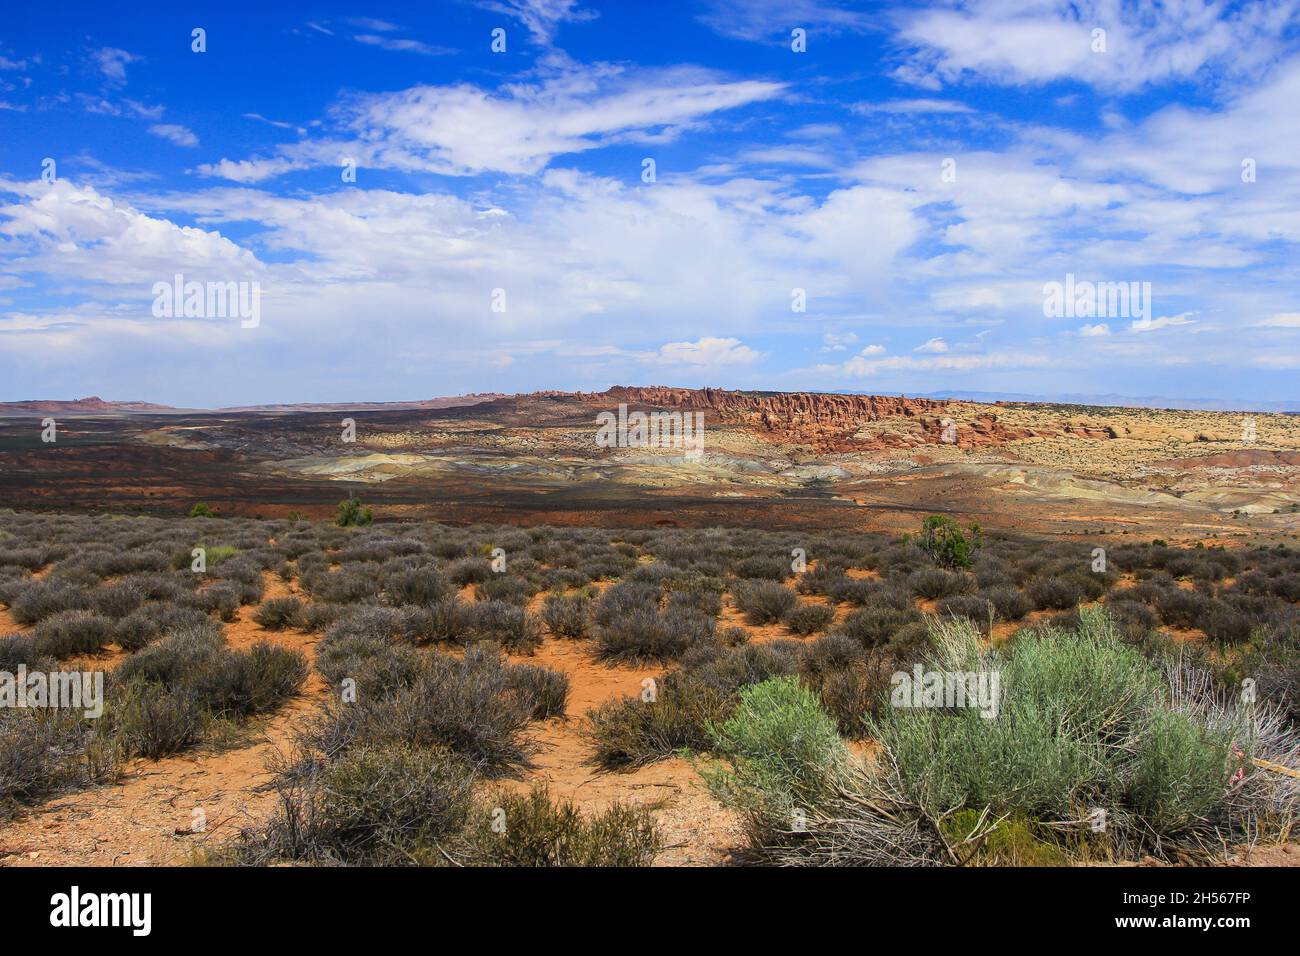 Arches National Park trail view on sunny summer day | Amazing landscape with scrubby vegetation, dry land with sandstone formations in the distance Stock Photo